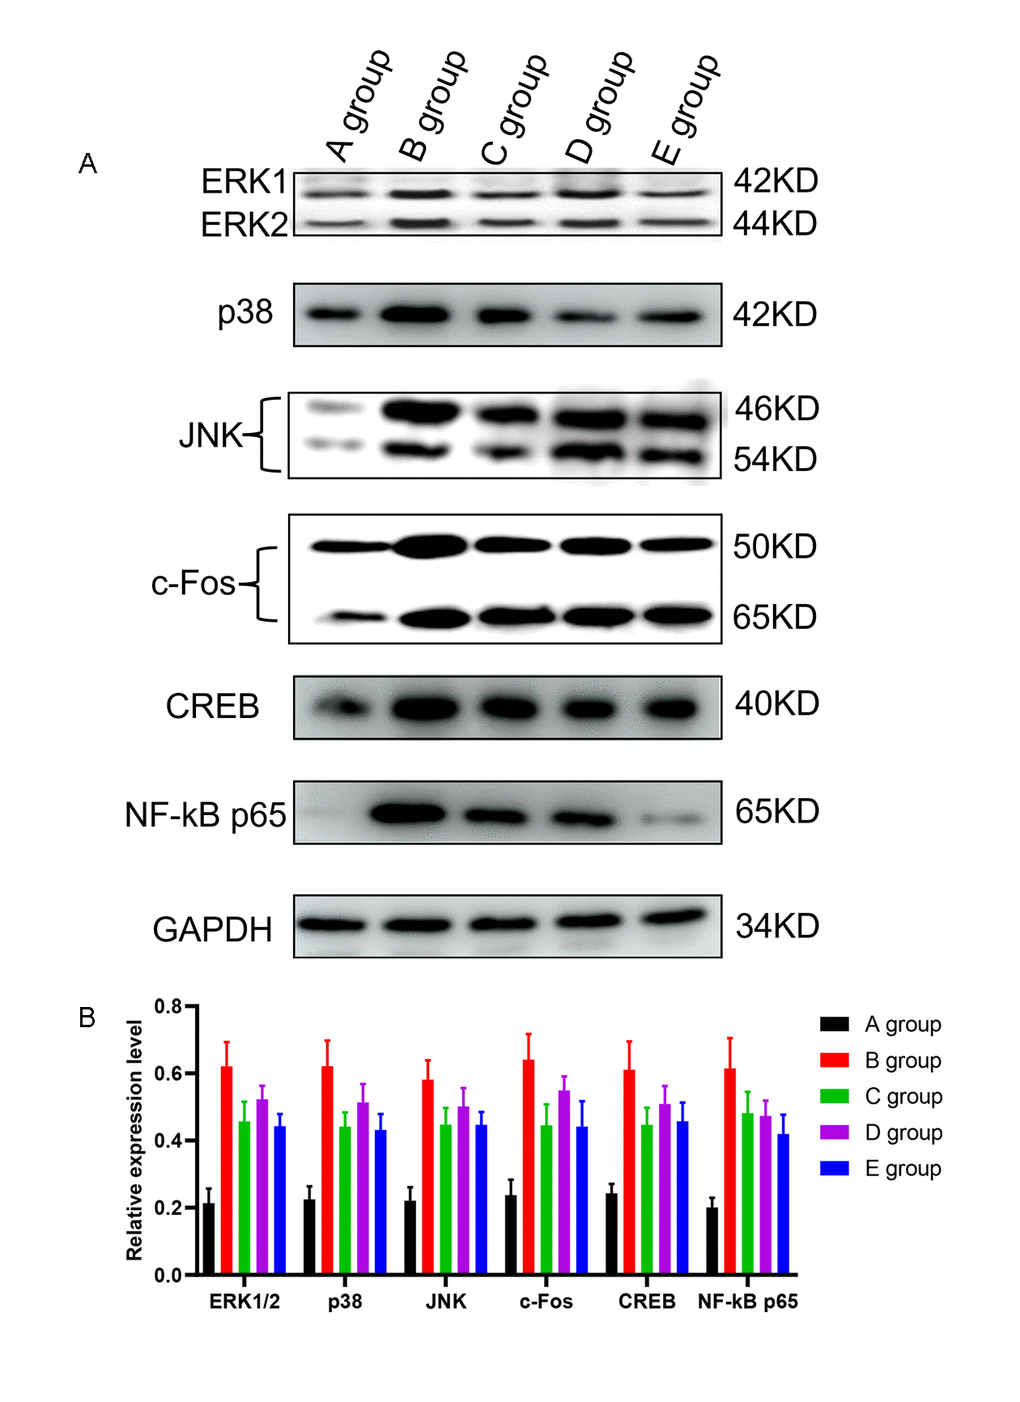 The effect of Huangqi Guizhi Wuwu Decoction on the expression of ERK1/2, p38, JNK, c-Fos, CREB and NF-kB in the L4-L5 dorsal root ganglions of different rat groups detected by western blotting. (A) The expression of ERK1/2, p38, JNK, c-Fos, CREB, NF-kB and GAPDH in different rat groups. (B) The relative expression levels of ERK1/2, p38, JNK, c-Fos, CREB, and NF-kB compared to GAPDH in different rat groups.